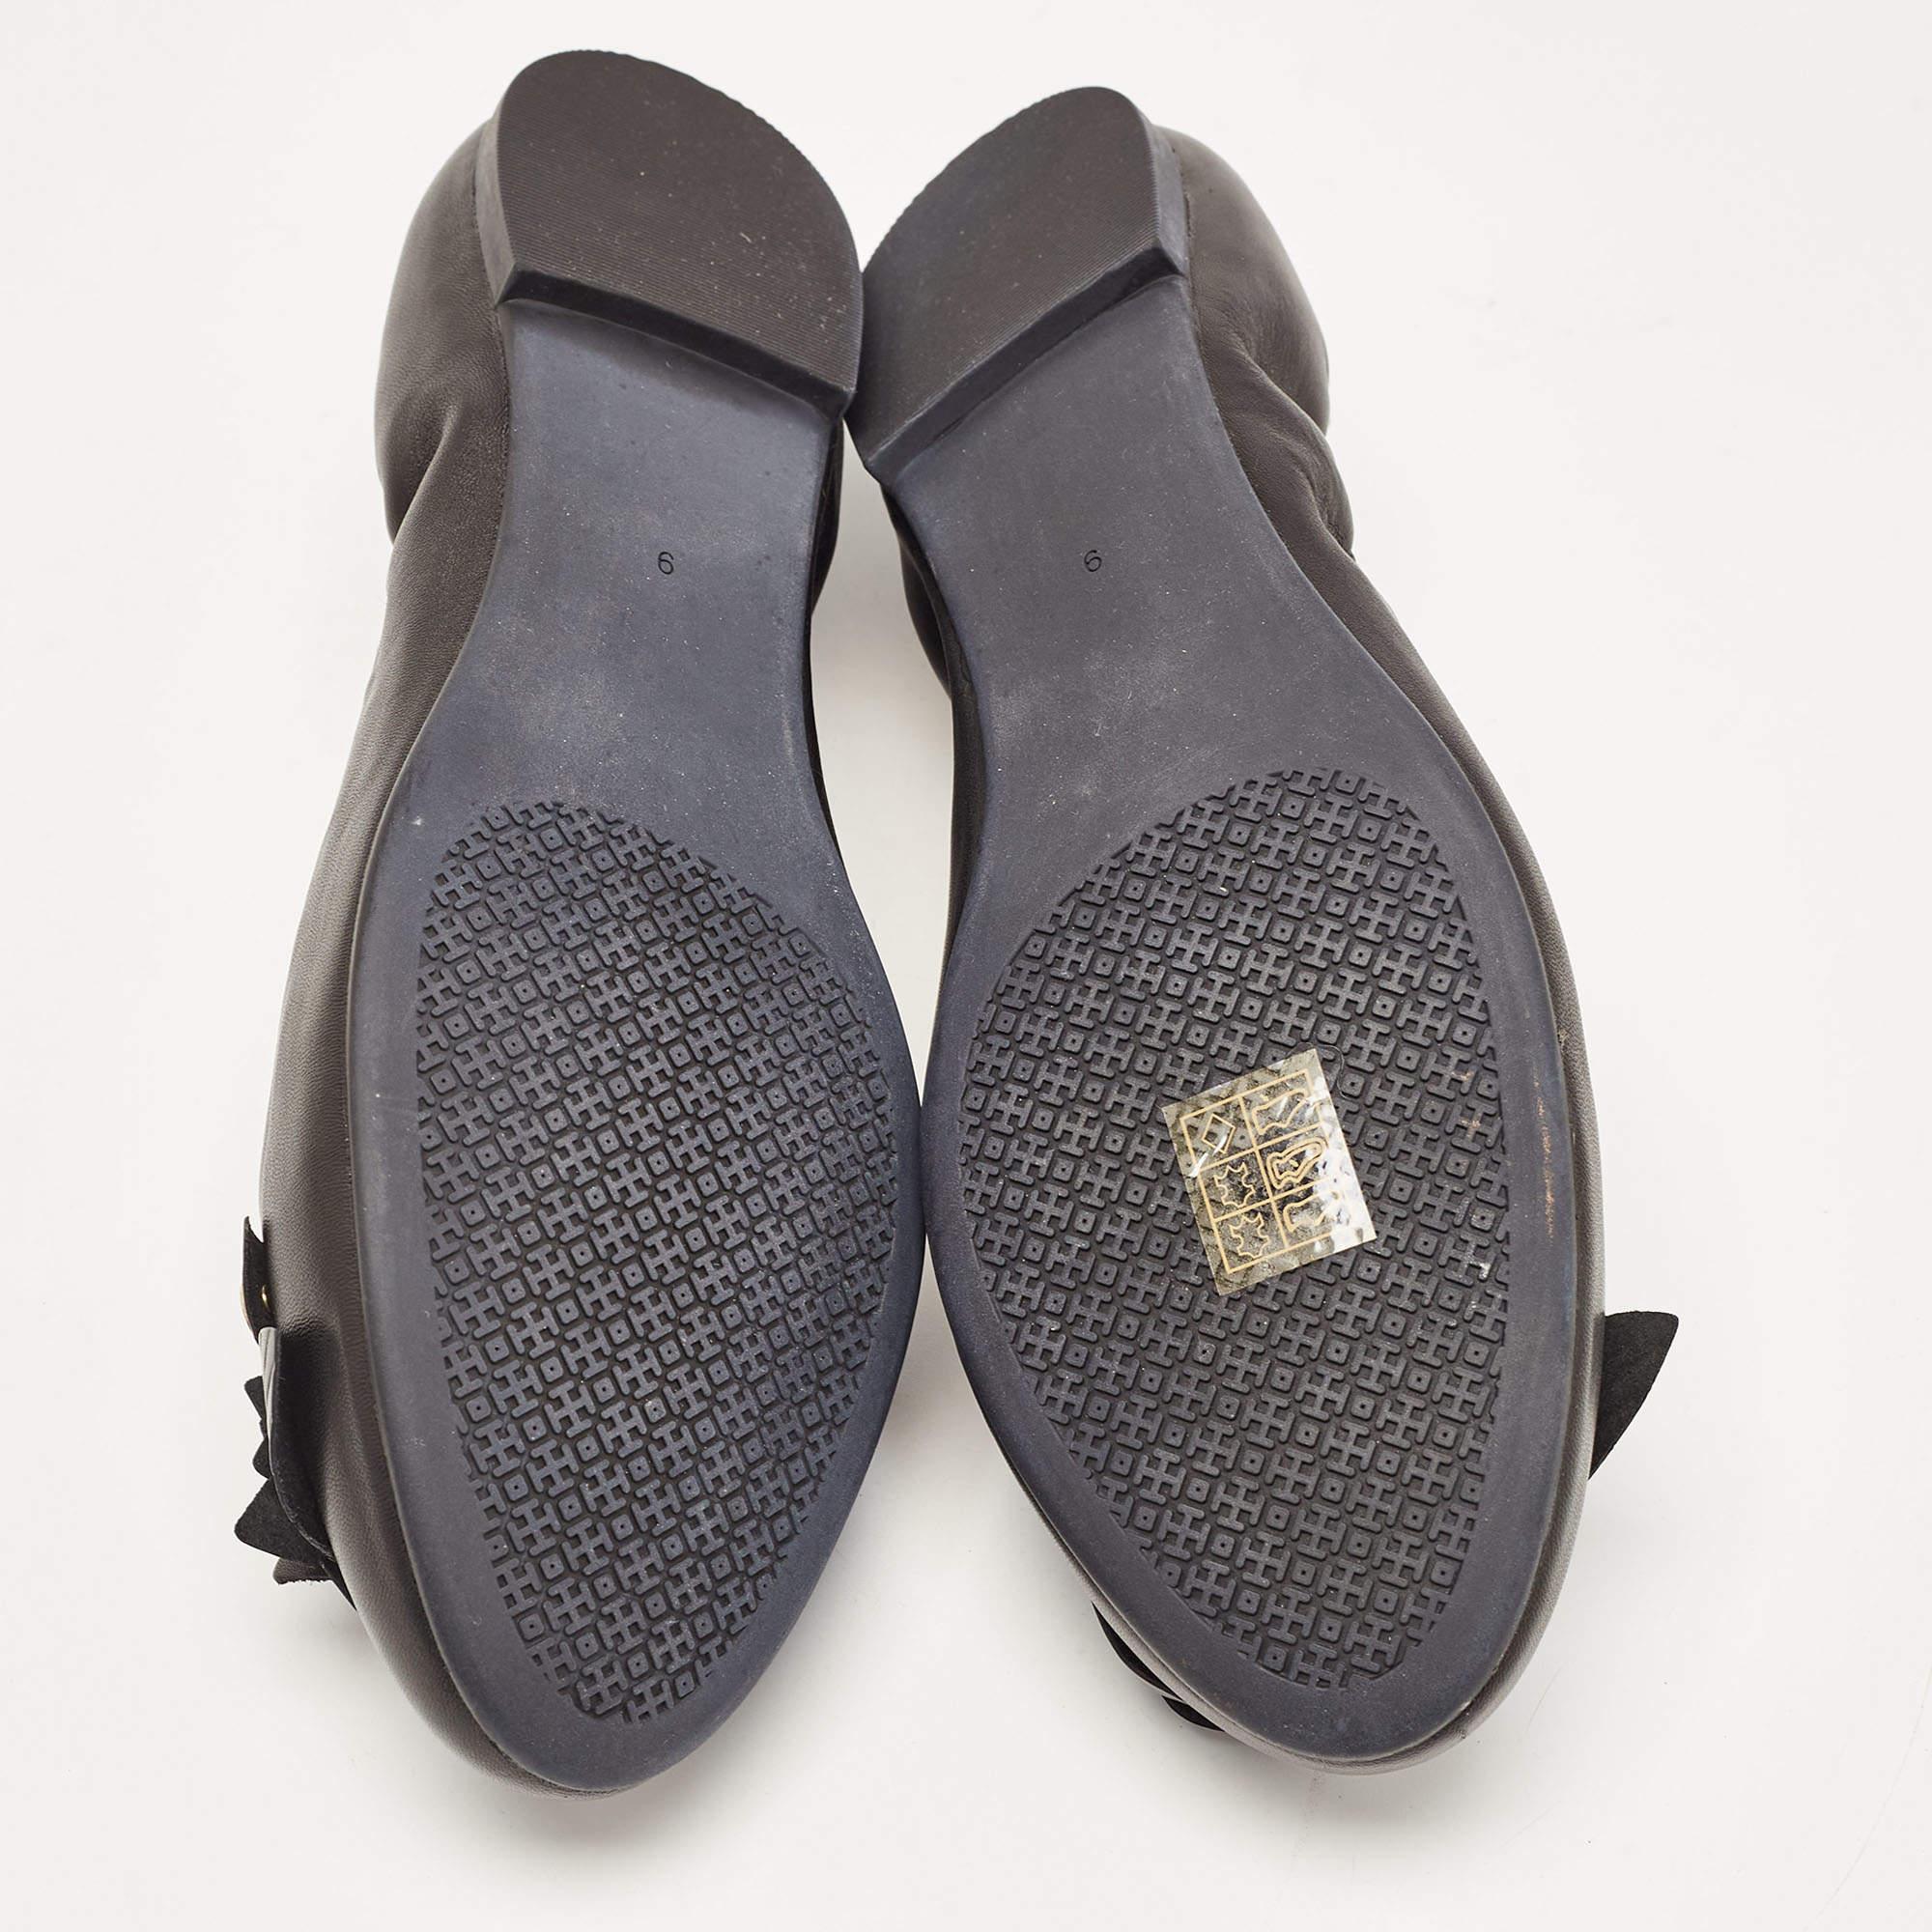 Tory Burch Black Leather Blossom Ballet Flats Size 39.5 For Sale 4